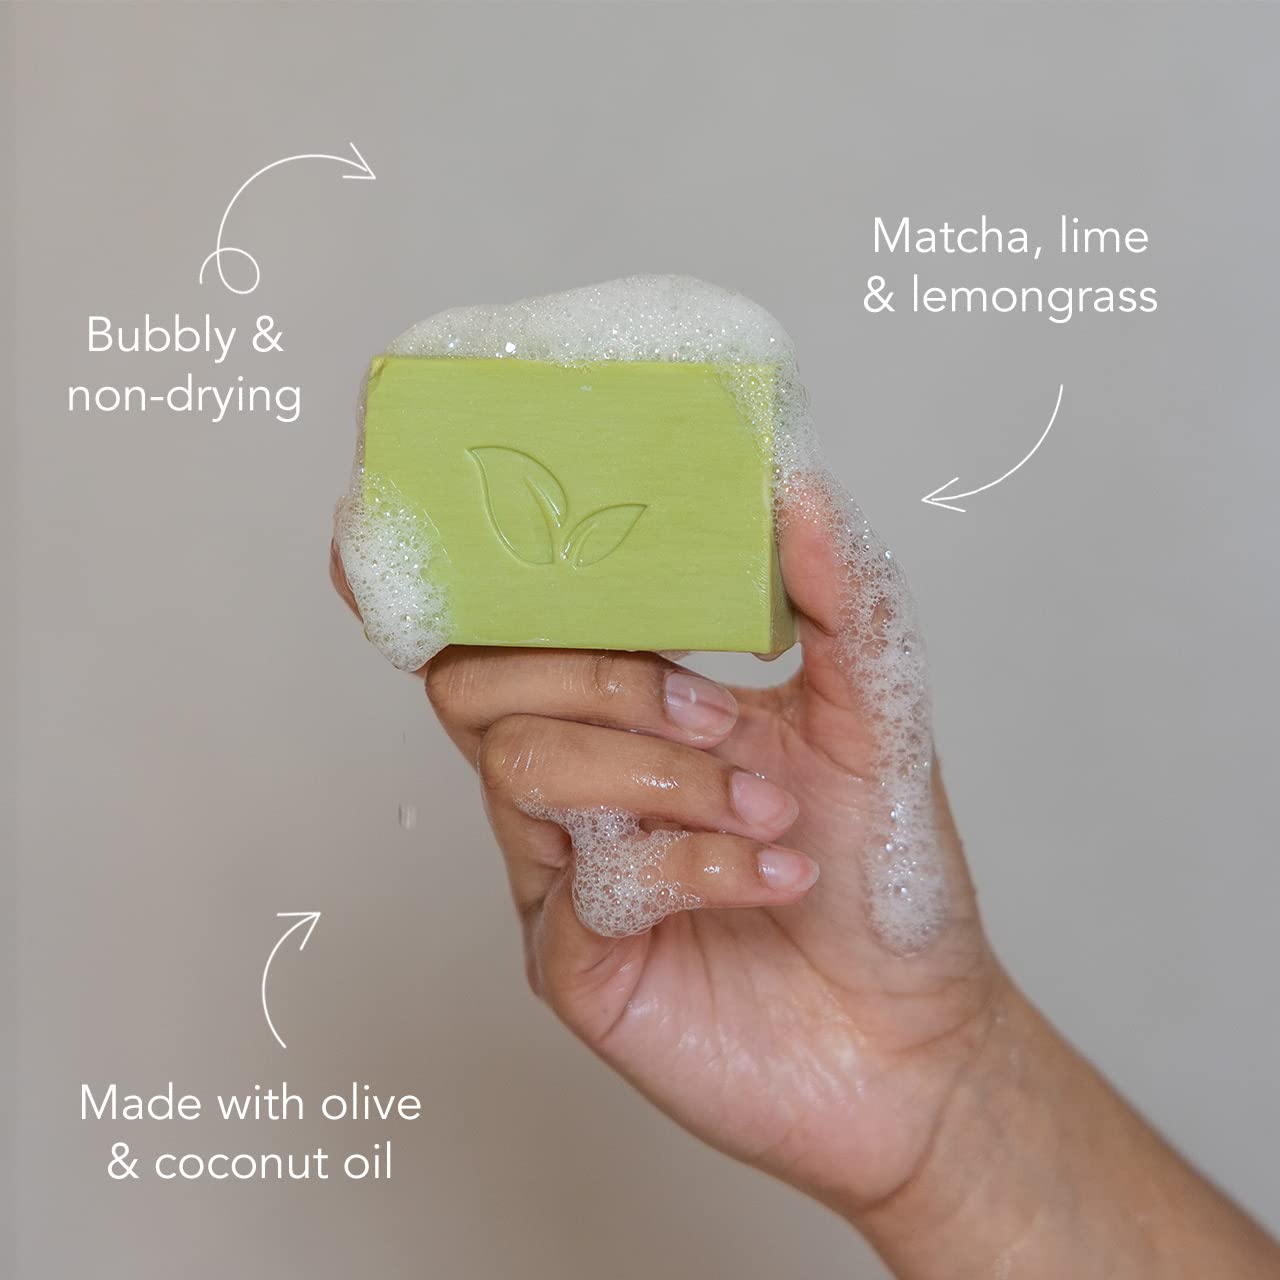 Ethique Invigorating Matcha, Lime, & Lemongrass Soap Bar - Body Wash for All Skin Types - Plastic-Free, Vegan, Cruelty-Free, Eco-Friendly, 4.23 oz (Pack of 1) : Beauty & Personal Care